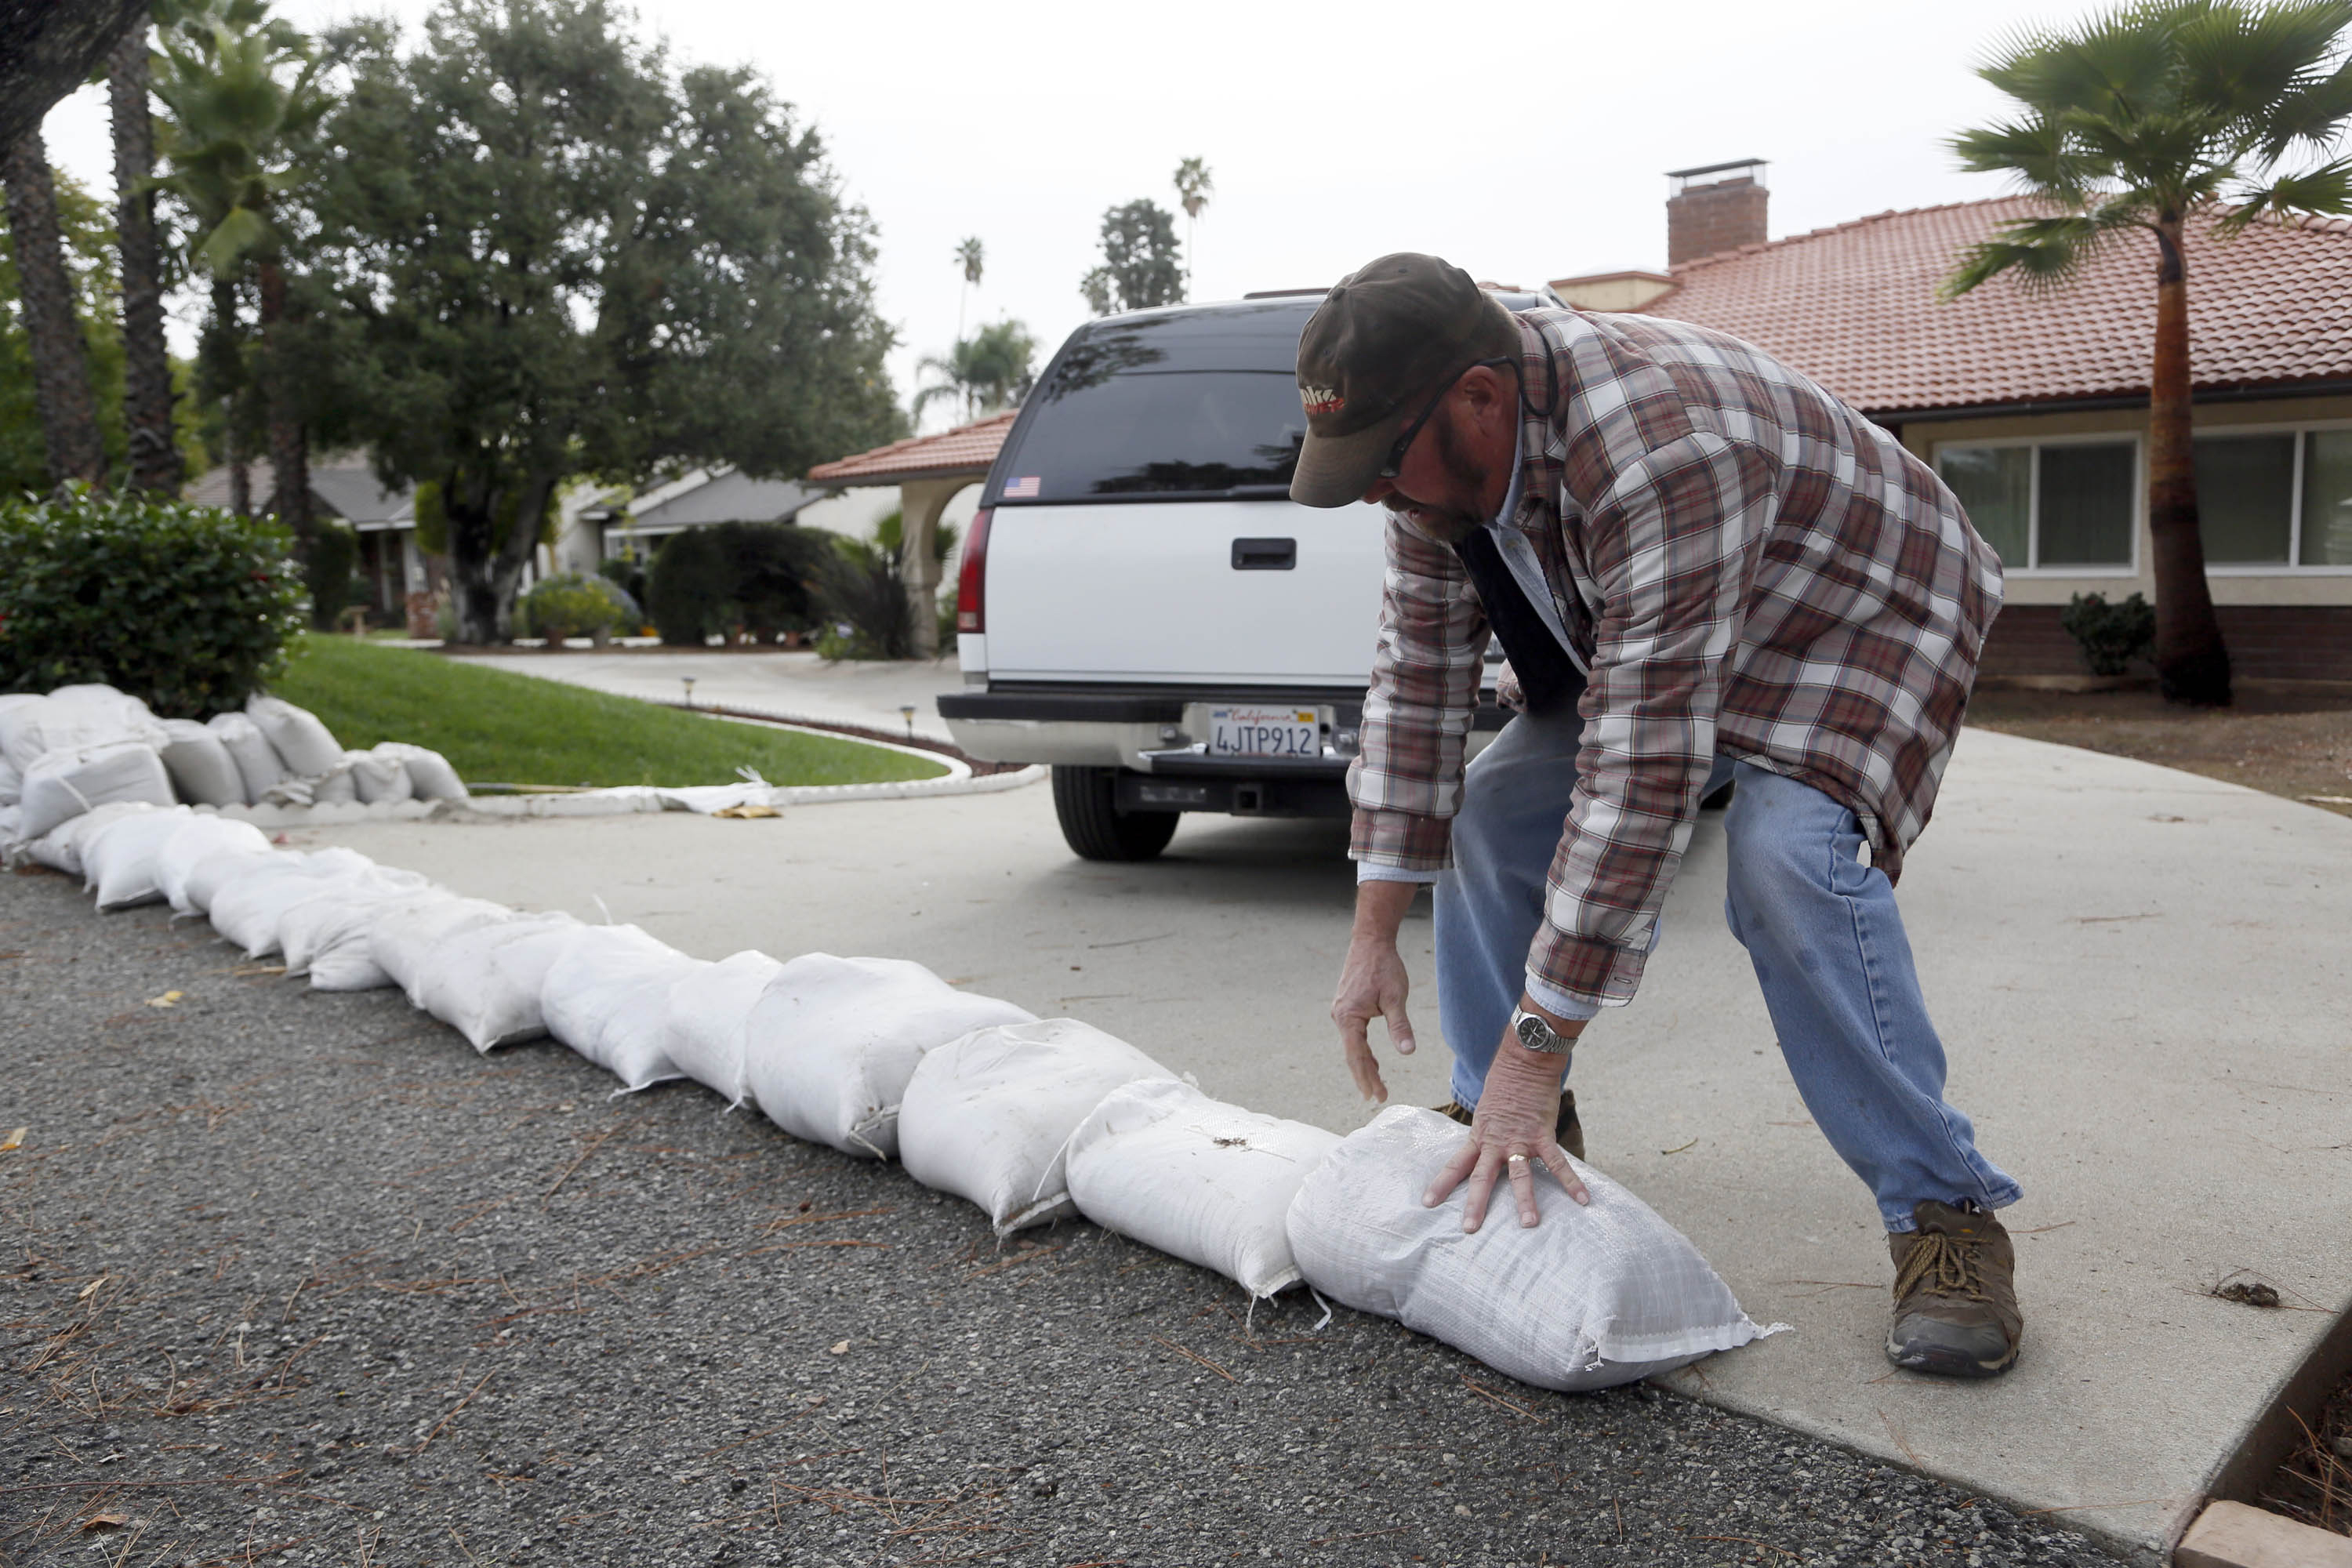 Richard Pope places sand bags along his driveway to protect his home from an expected storm in Glendora, Calif. on Monday, Dec.1, 2014.  California is bracing for the arrival of a new, more powerful Pacific storm following a weekend of scattered rain, showers and snow. The National Weather Service says a low-pressure system off the coast will draw a plume of subtropical moisture northward into the state beginning on Tuesday. (AP Photo/Nick Ut)